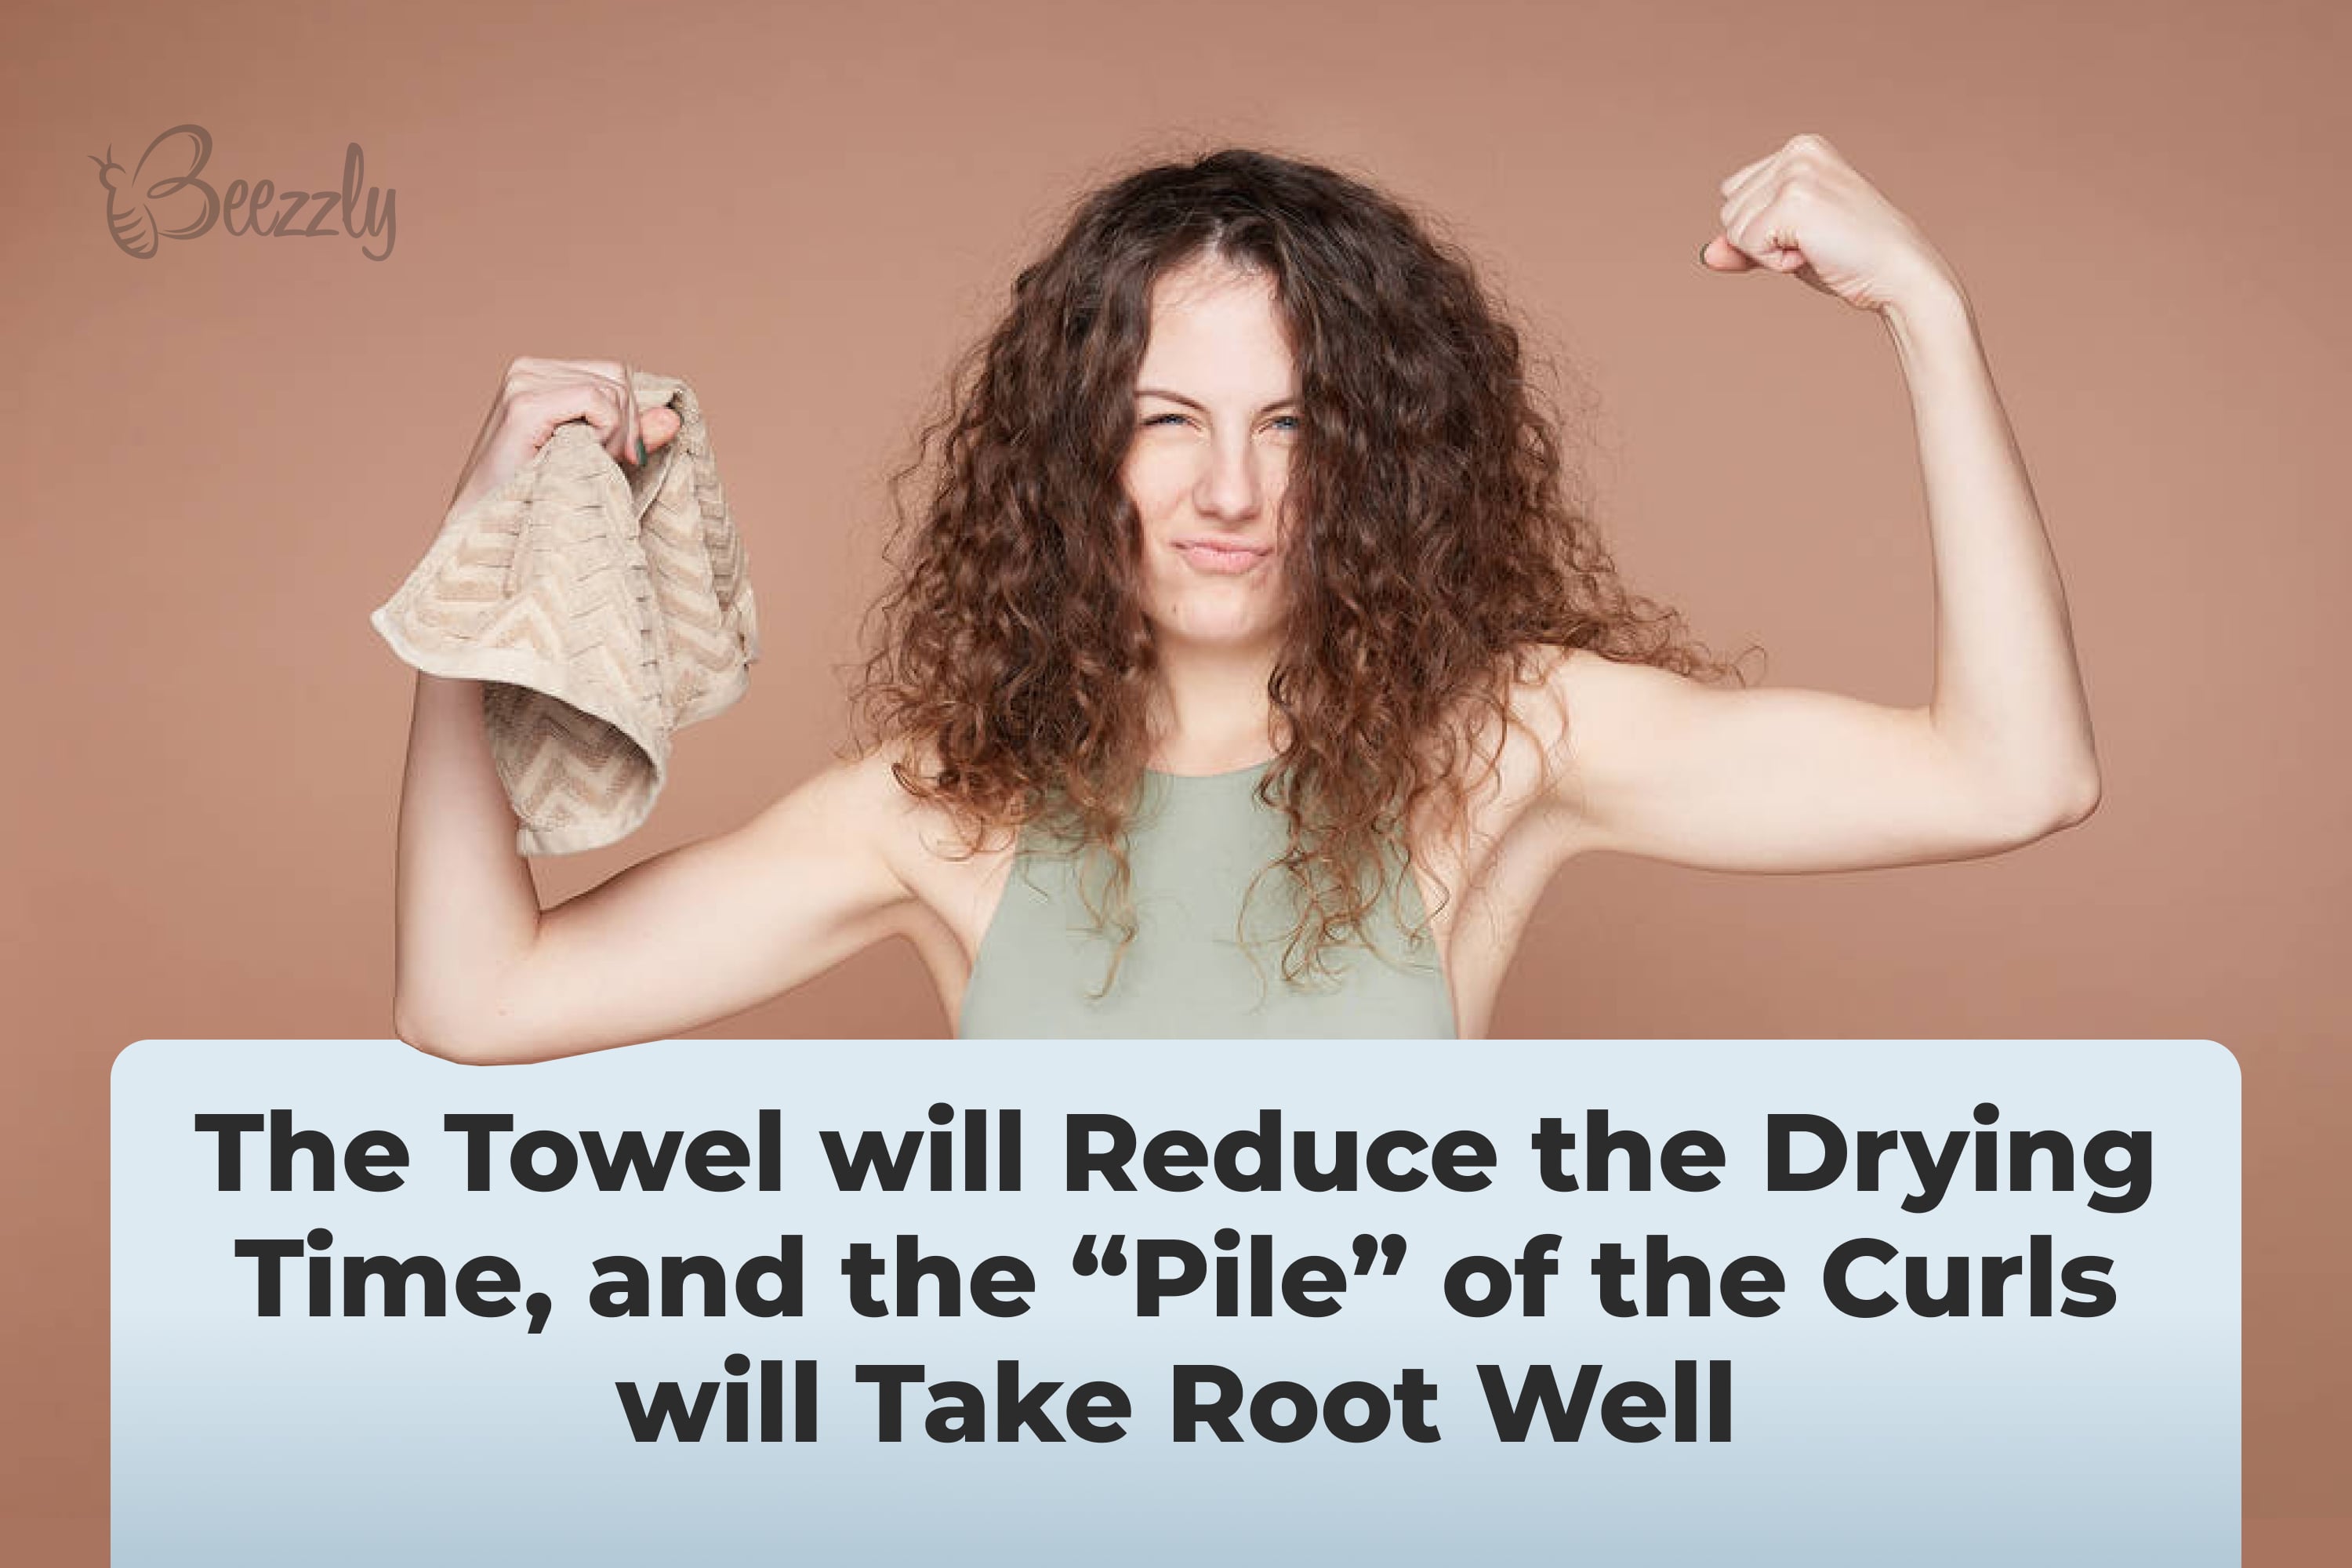 The towel will reduce the drying time, and the “pile” of the curls will take root well